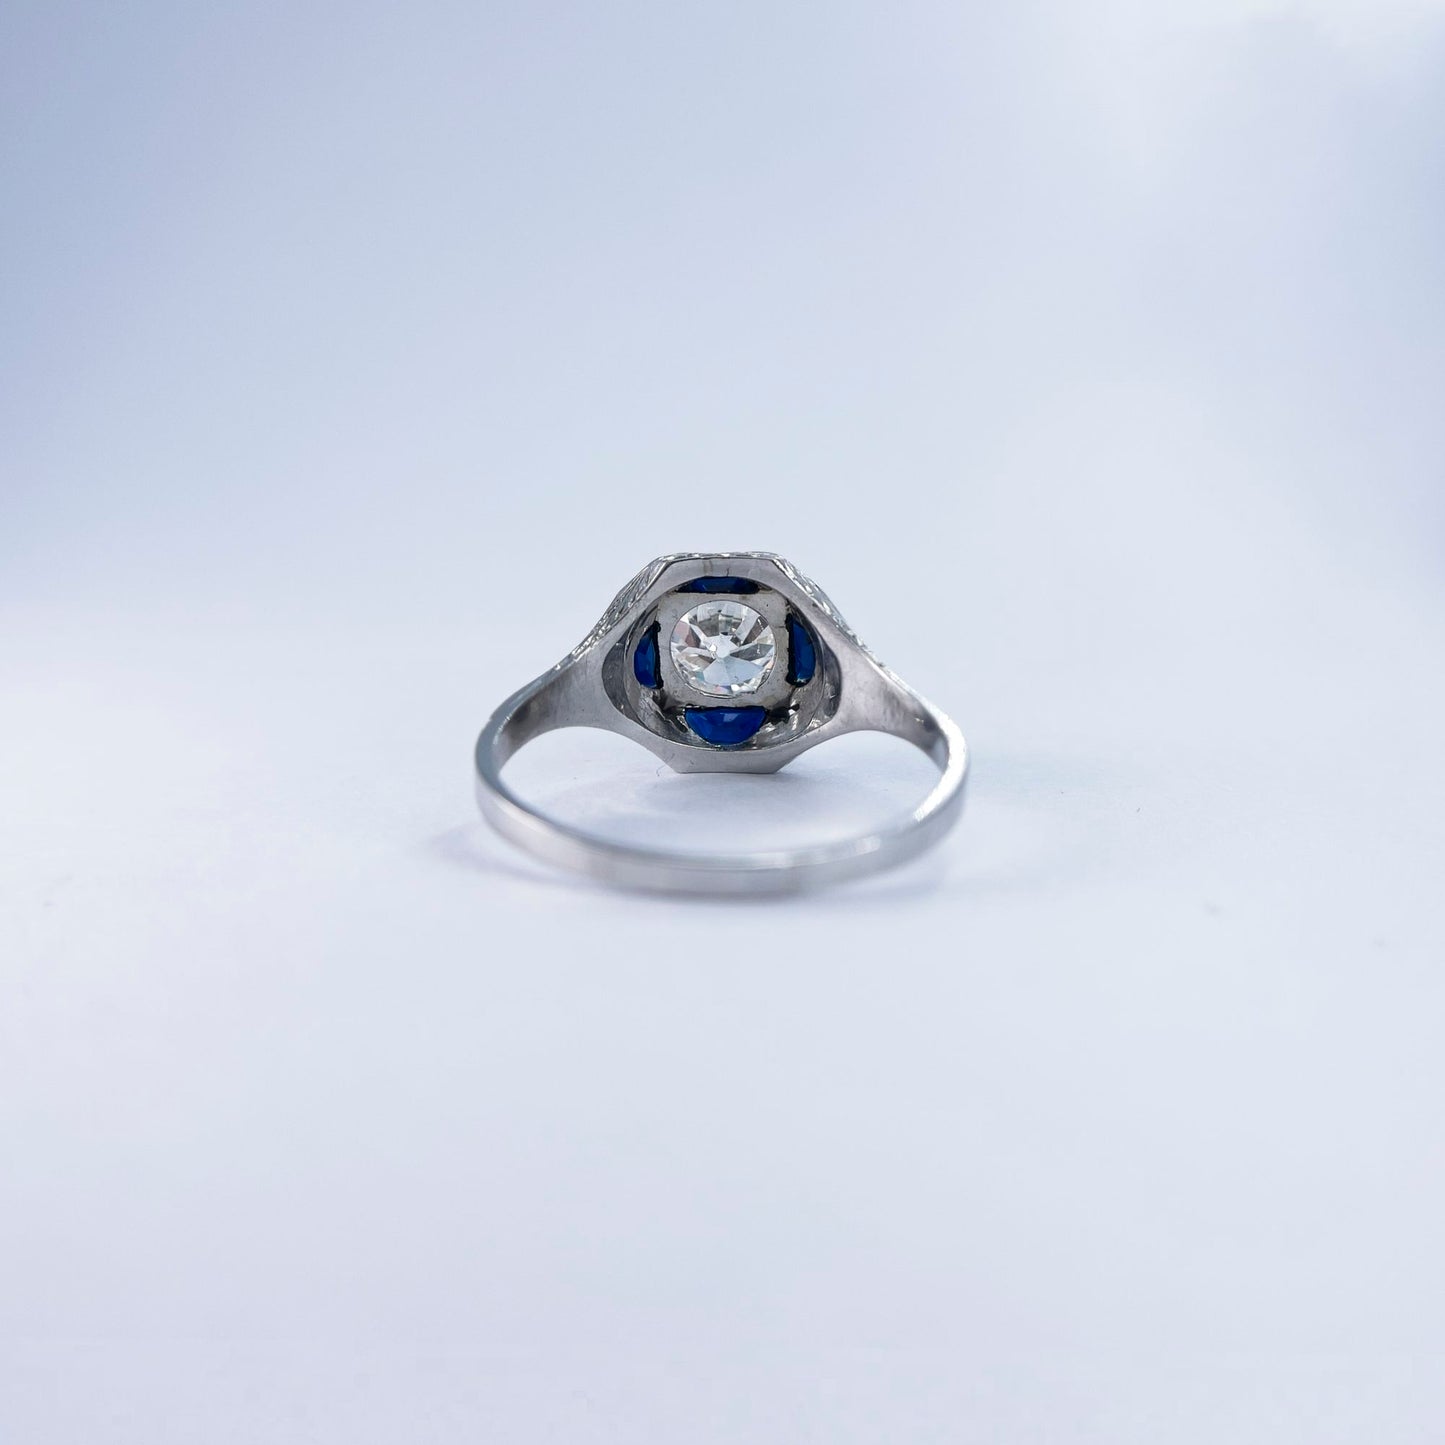 18K White Gold Old European Round Cut Diamond Ring with Half Moon French Cut Sapphires